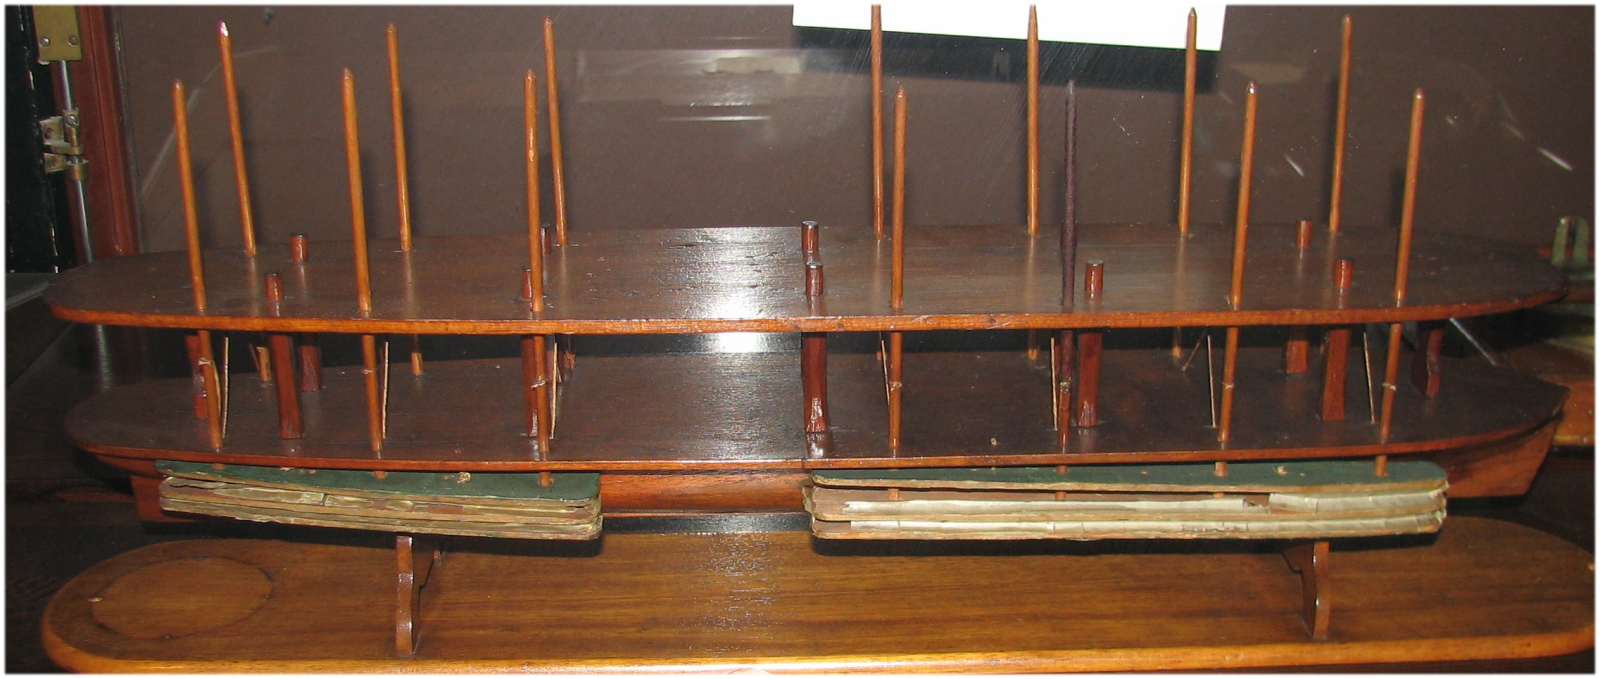 Replica of Lincoln's scale model of boat. Pontoons are in the foreground, deflated.